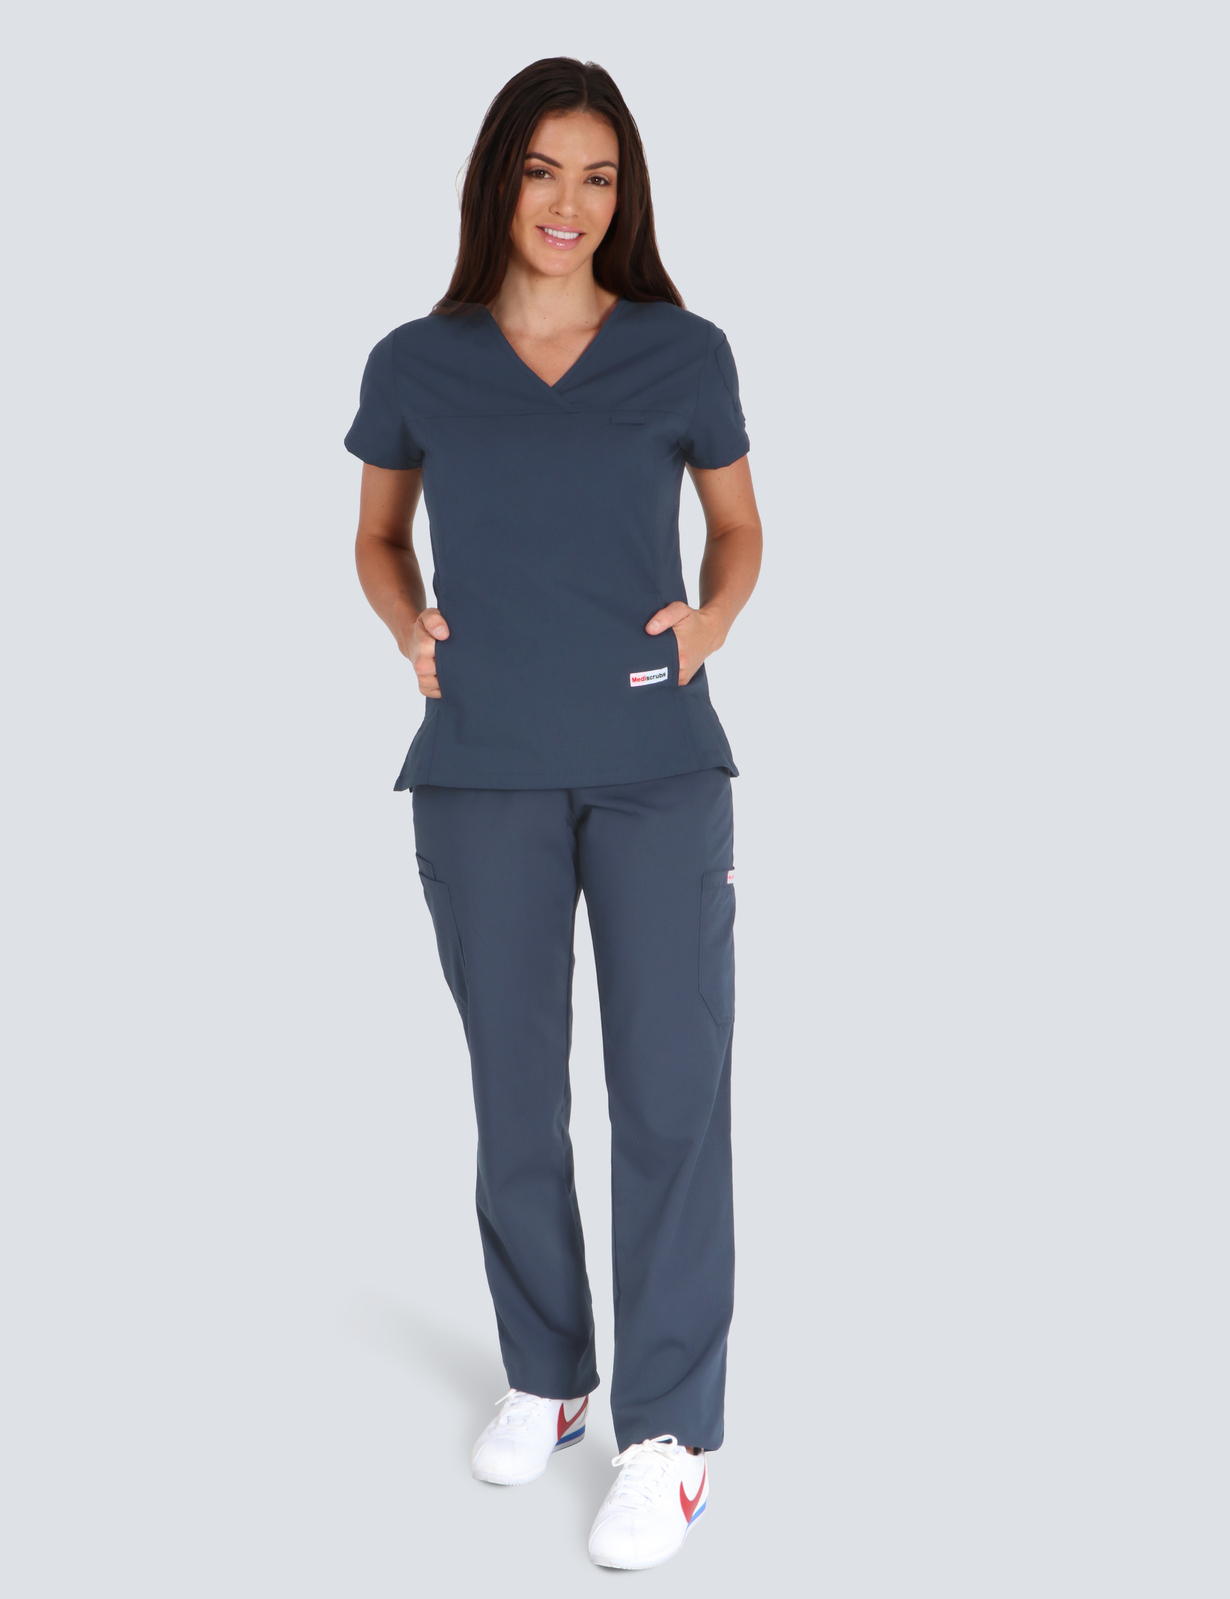 The Angliss Hospital - ED (Women's Fit Solid Scrub Top and Cargo Pants incl Logos)